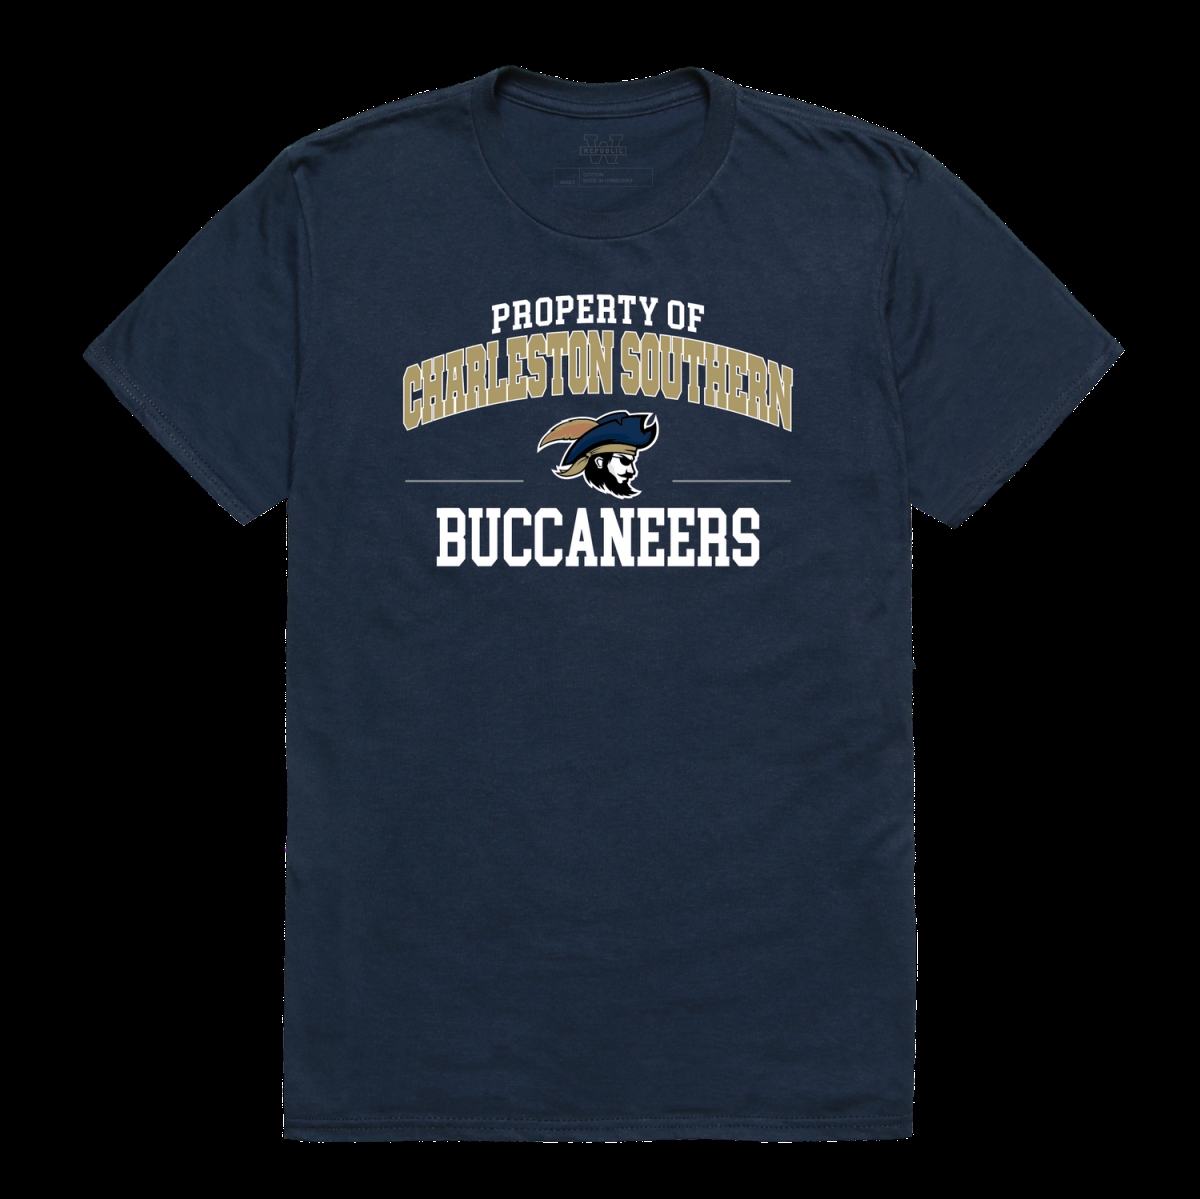 W Republic 517-736-NVY-03 College of Charleston Southern Buccanneers Property College T-Shirt&#44; Navy - Large